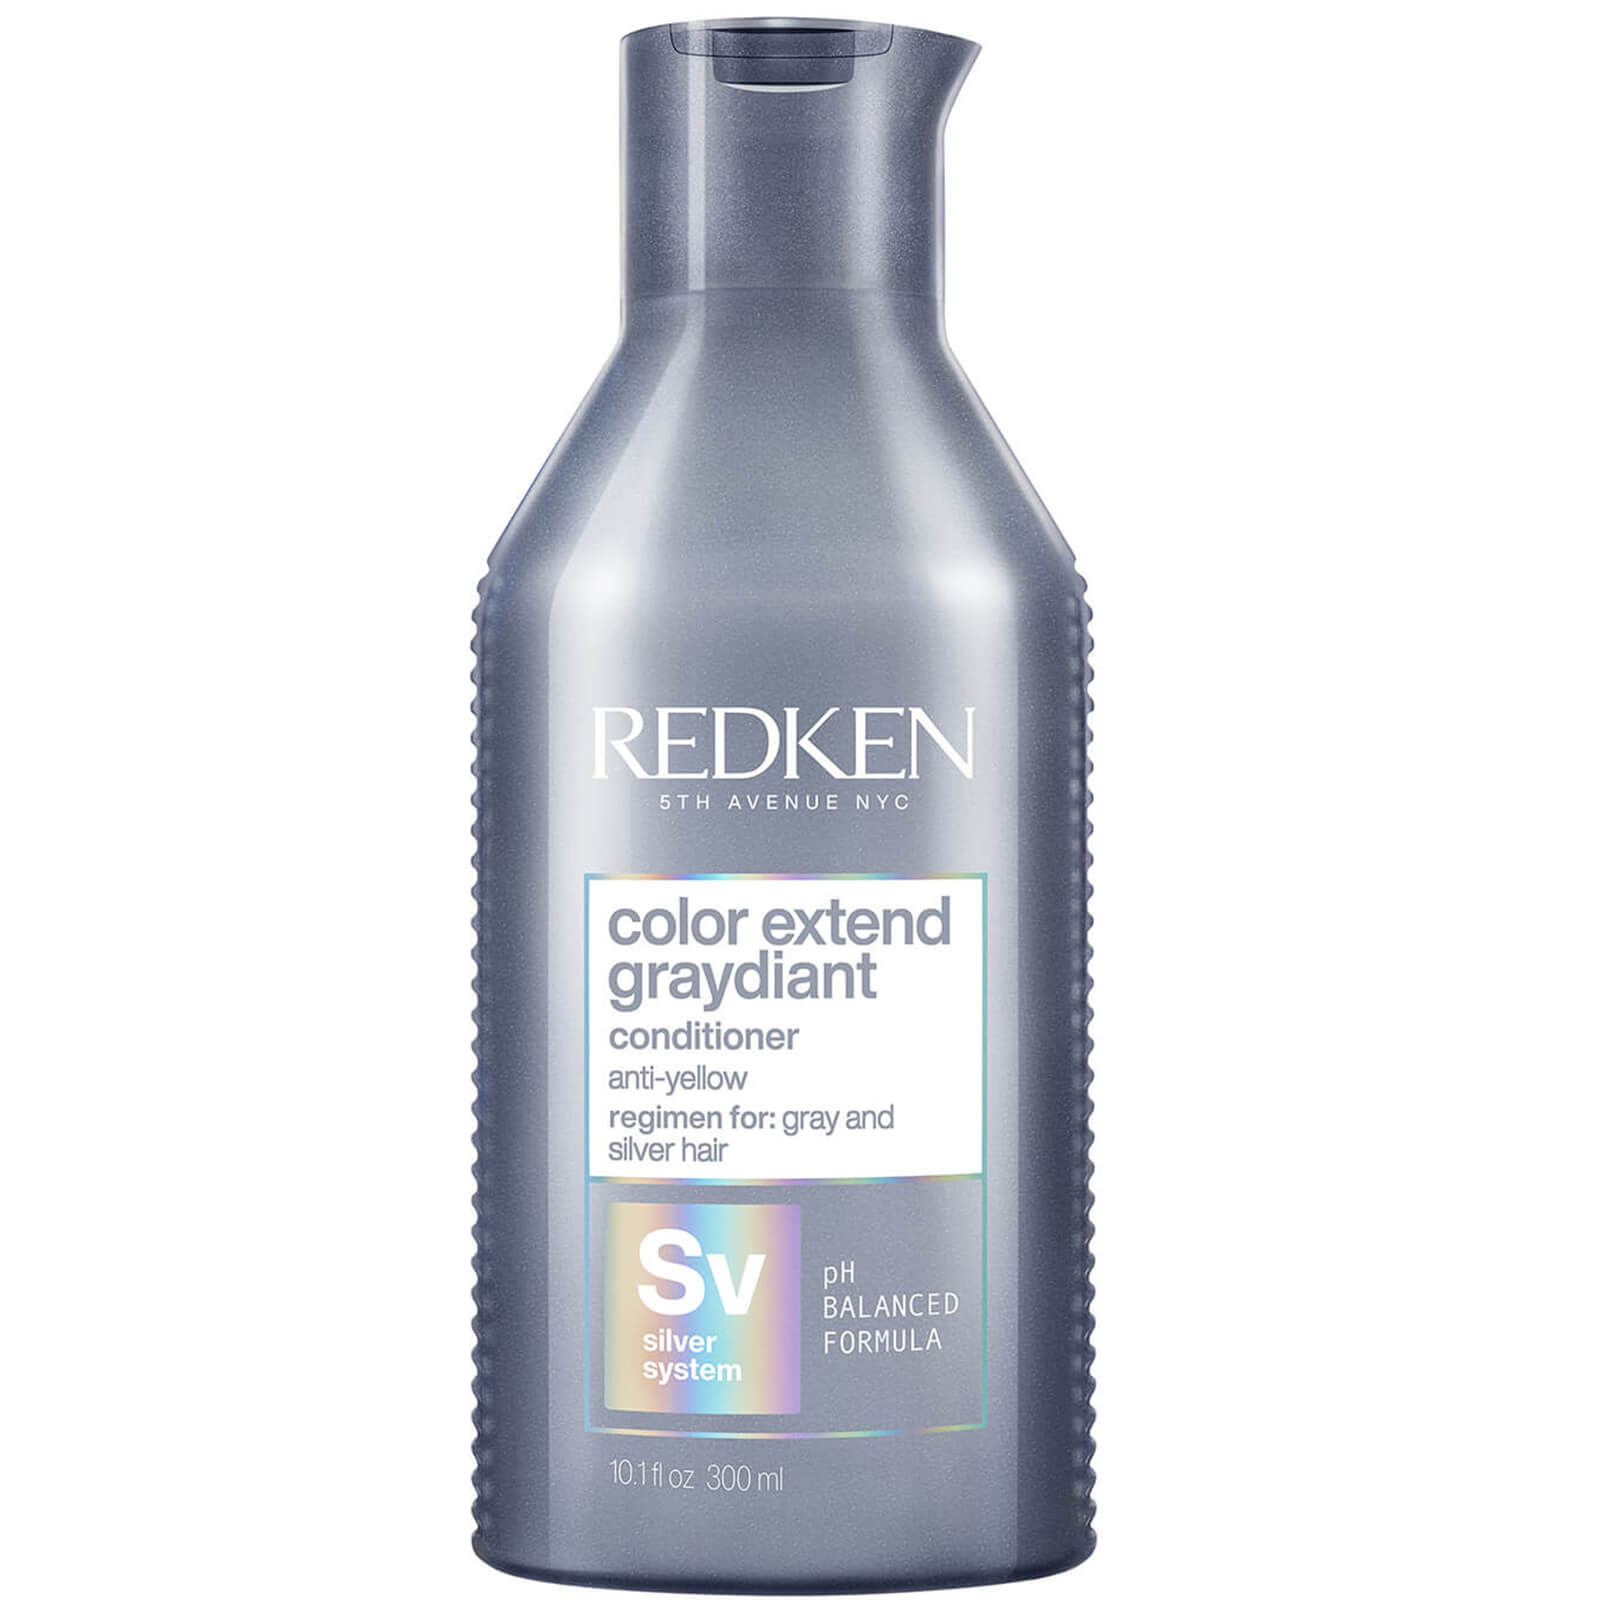 Image of Redken Color Extend Graydiant Conditioner 250ml